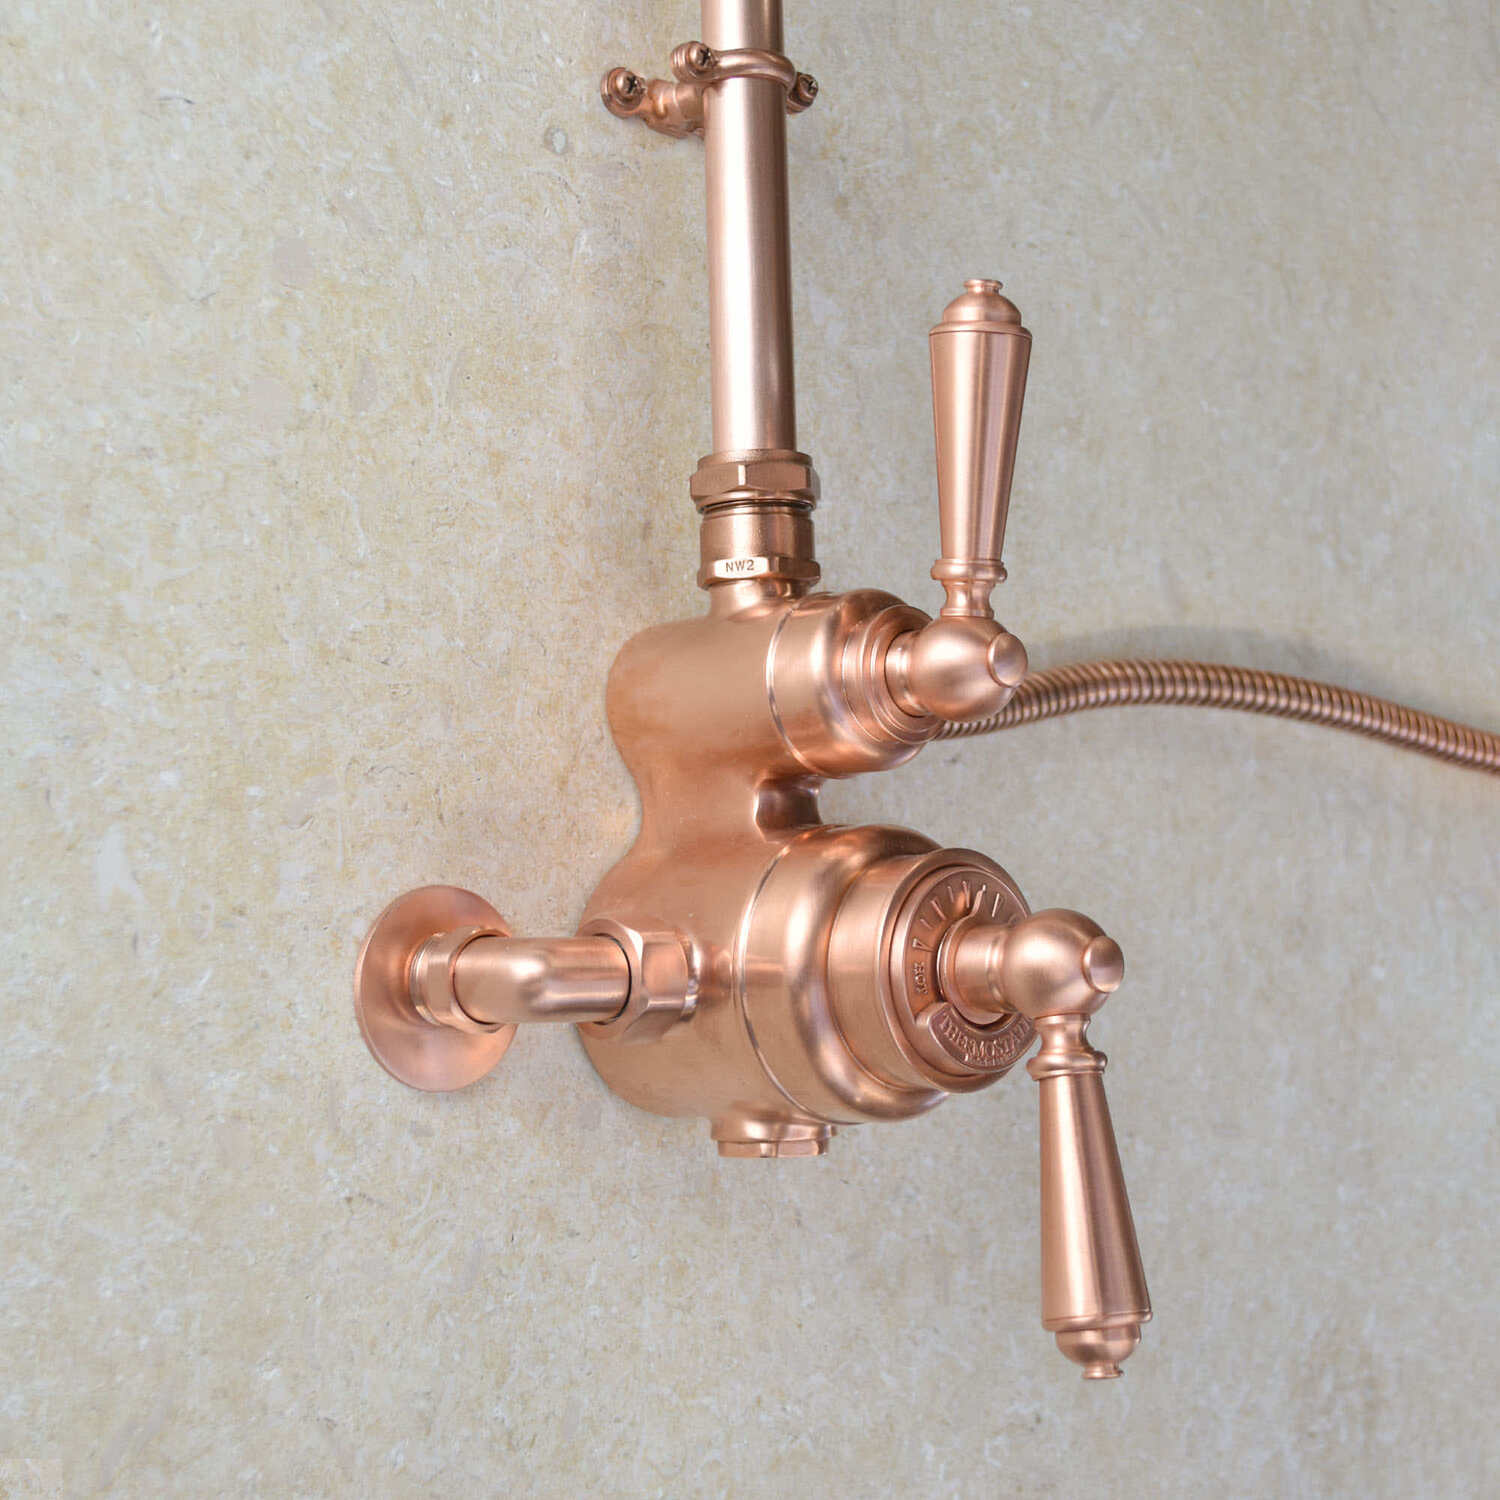 Durable and long-lasting copper shower valve - side photo